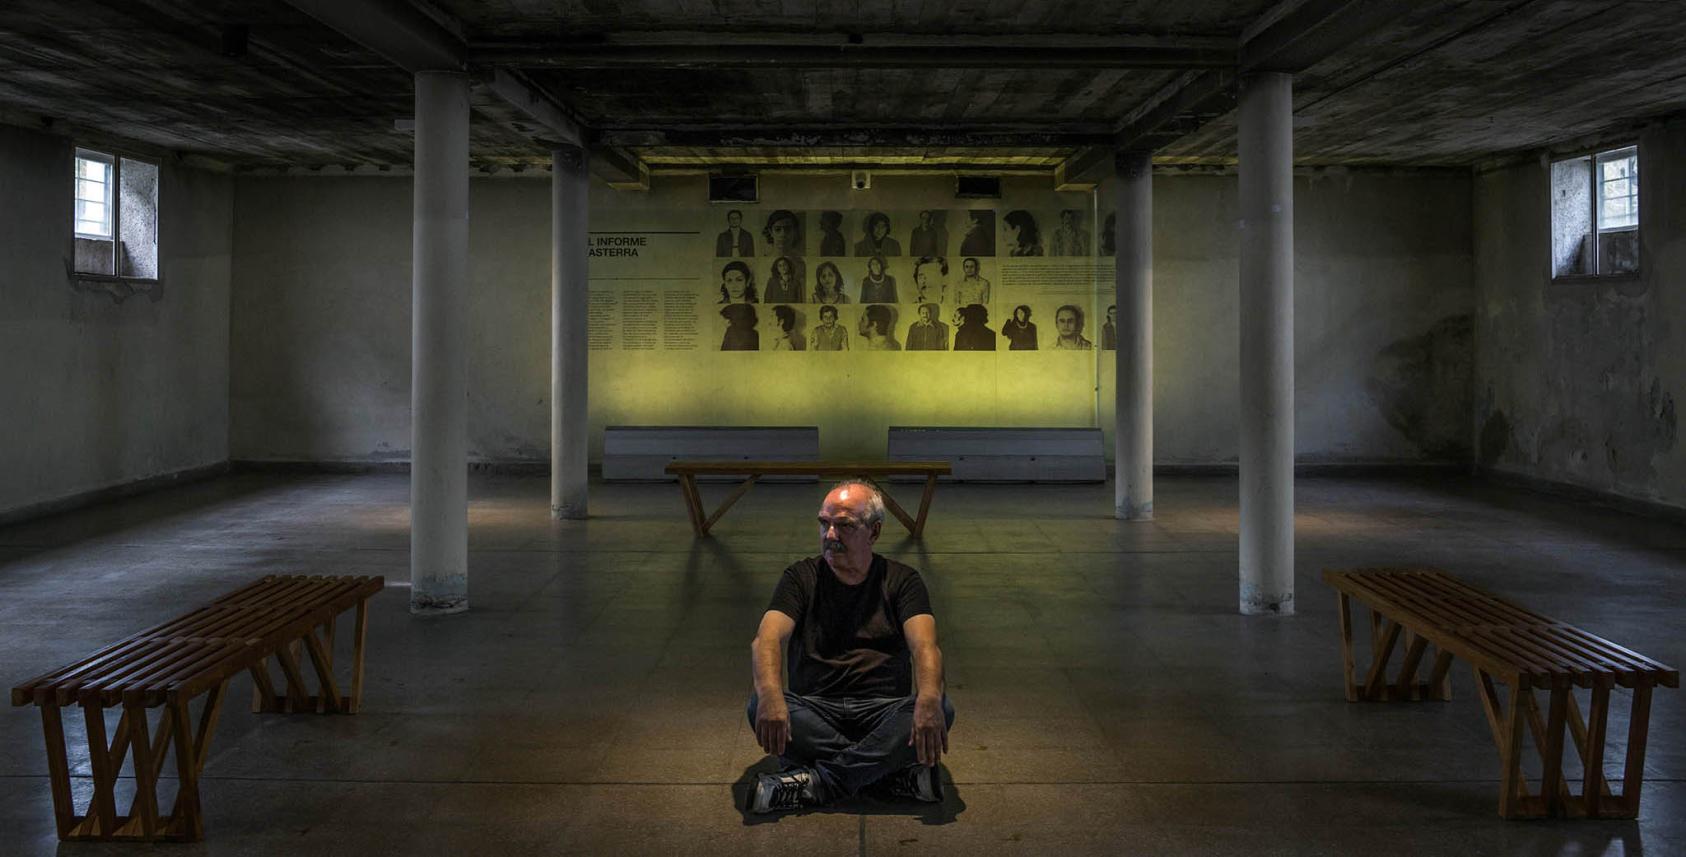 Carlos Muñoz, a former political prisoner during Argentina’s military dictatorship, in the compound in Buenos Aires, Argentina, where he was jailed and tortured for over a year, on May 13, 2018. (Mauricio Lima/The New York Times)